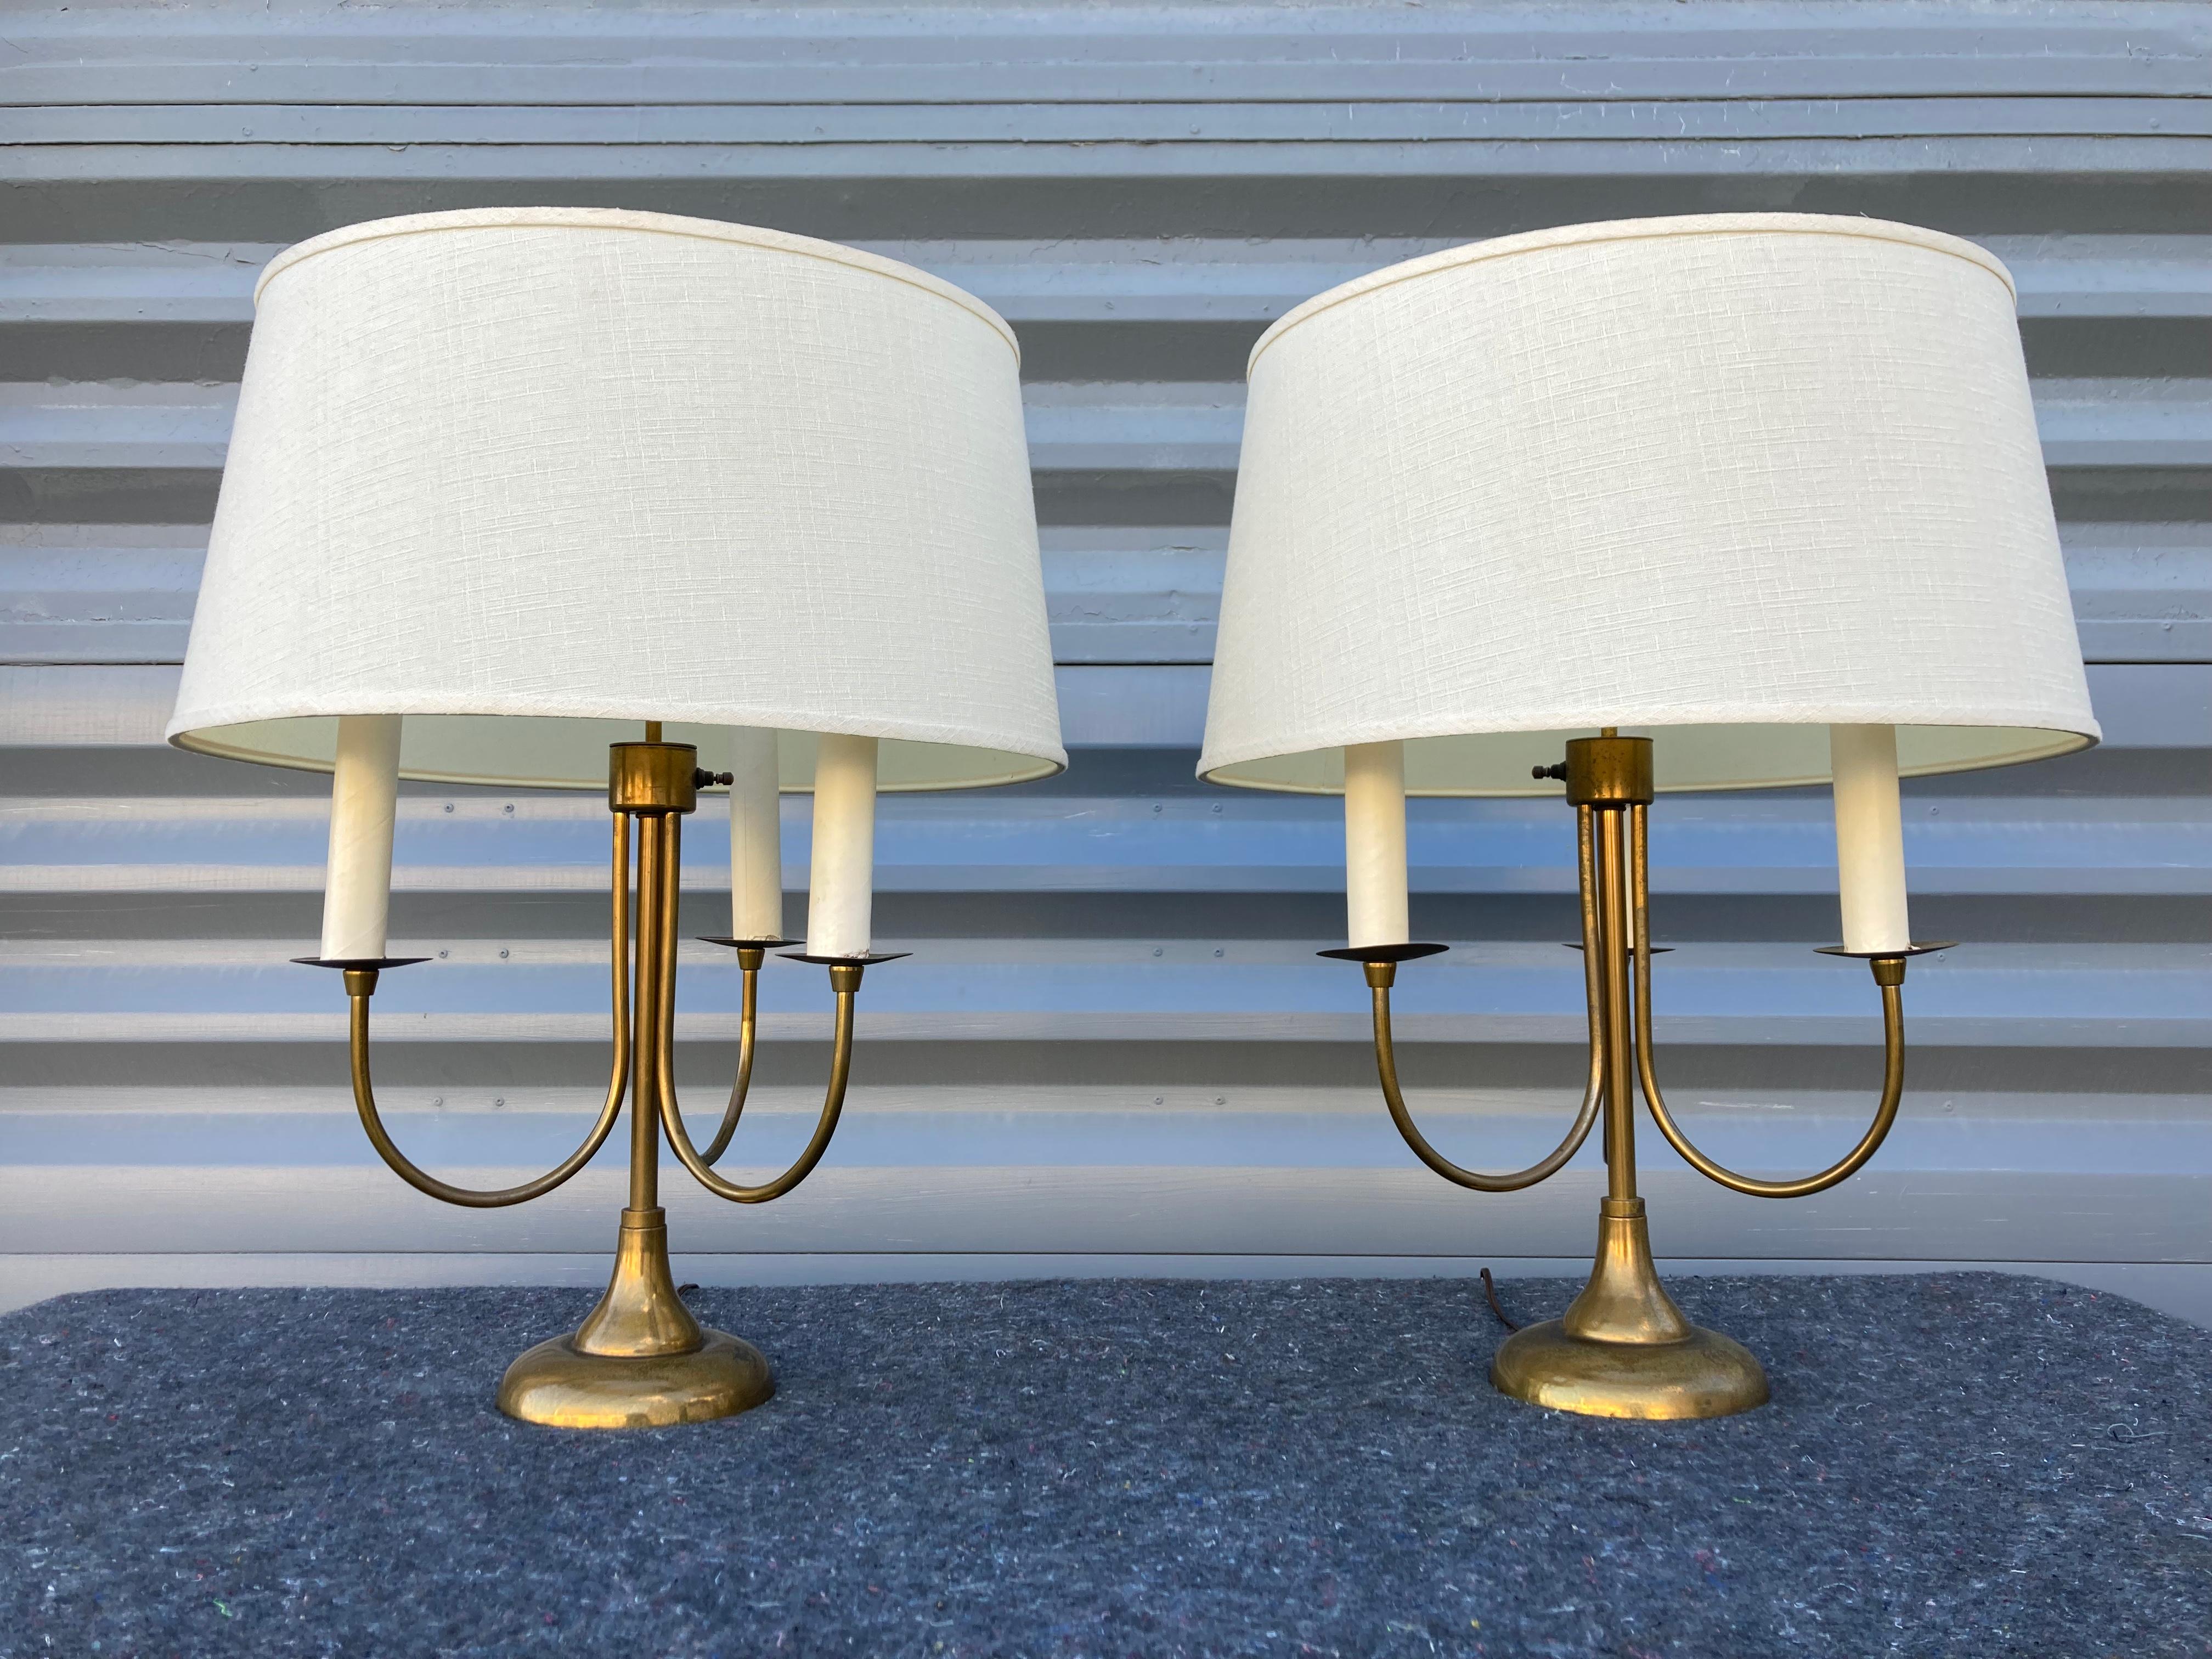 Pair of Mid-Century Modern Table Lamps, Brass, USA, 1950s For Sale 2